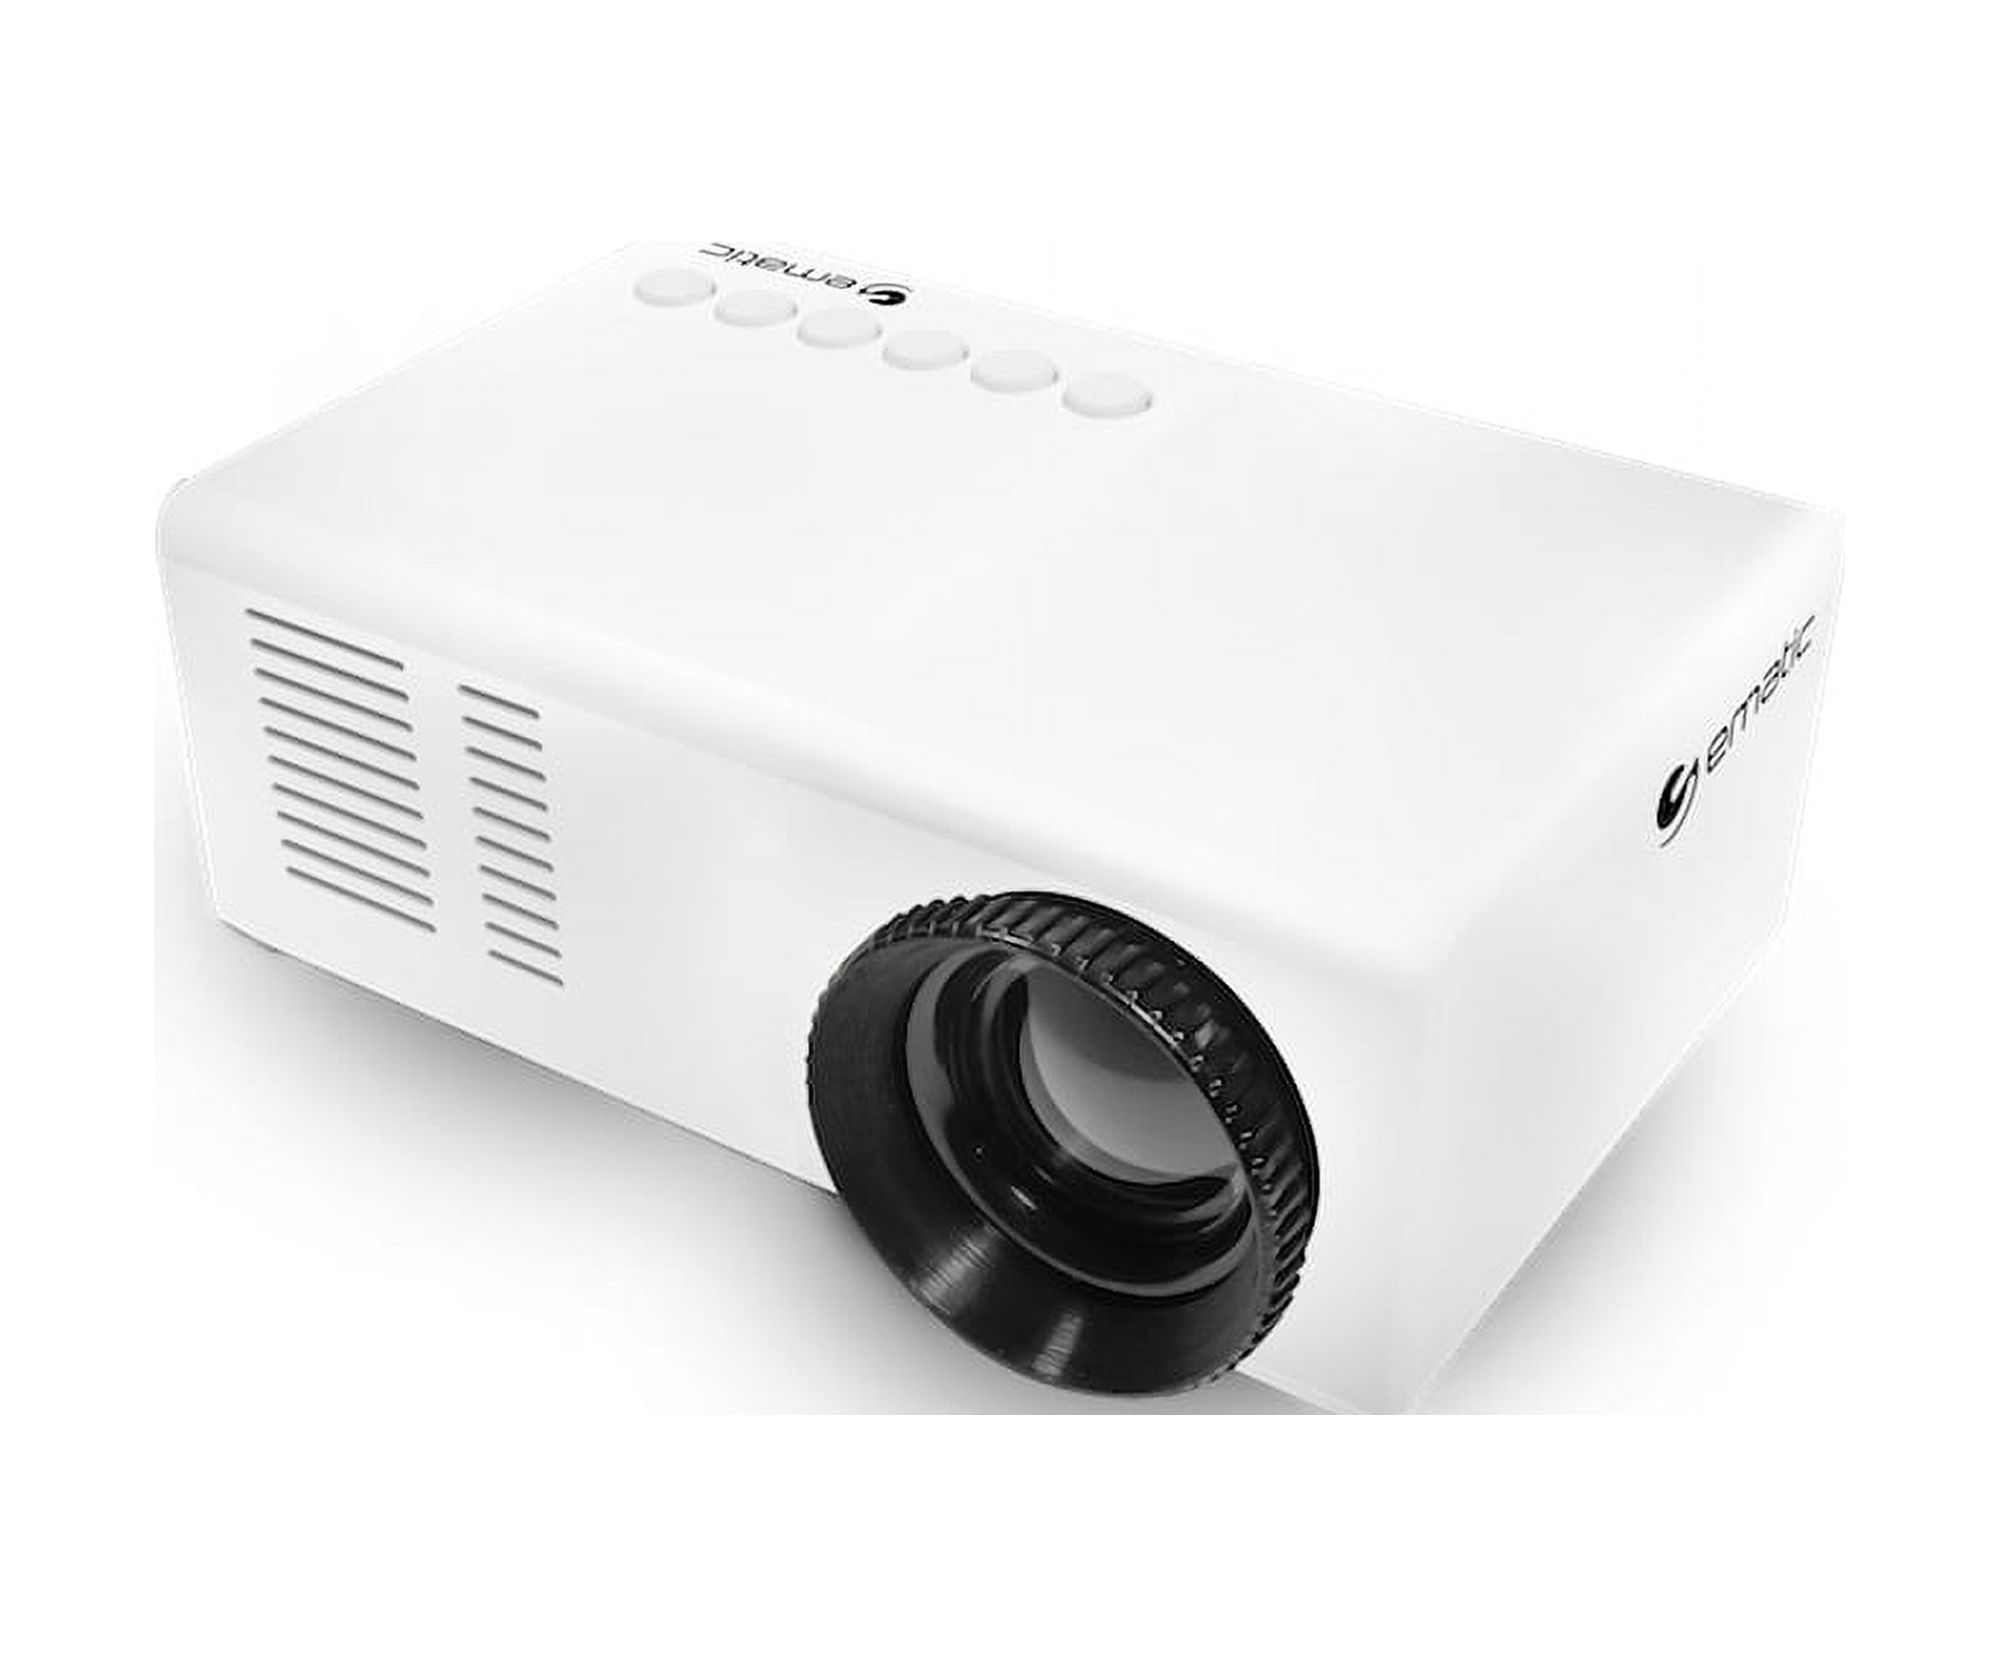 Ematic Mini Portable Theater Projector, White (EPJ480WH) - image 1 of 9